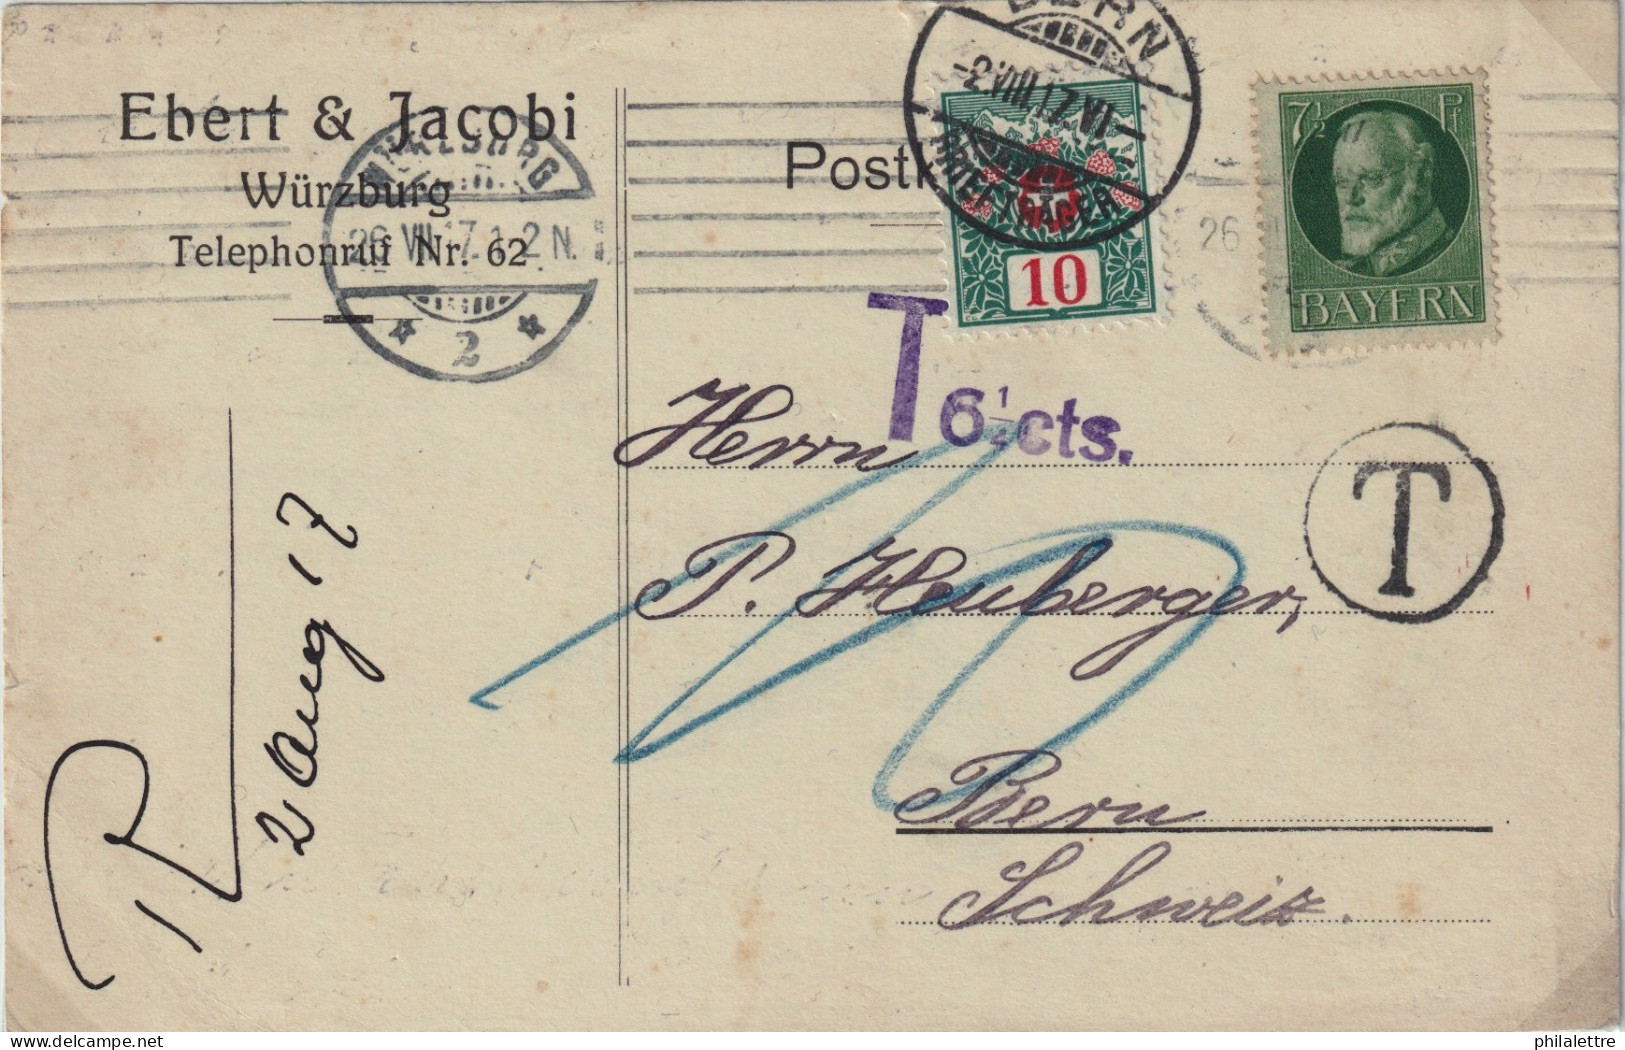 SUISSE / SWITZERLAND 1928 P. Due Mi.32 On PPC From BAVARIA Franked 7-1/2pf With "T 6-1/4cts" Postage Due Mark - Impuesto